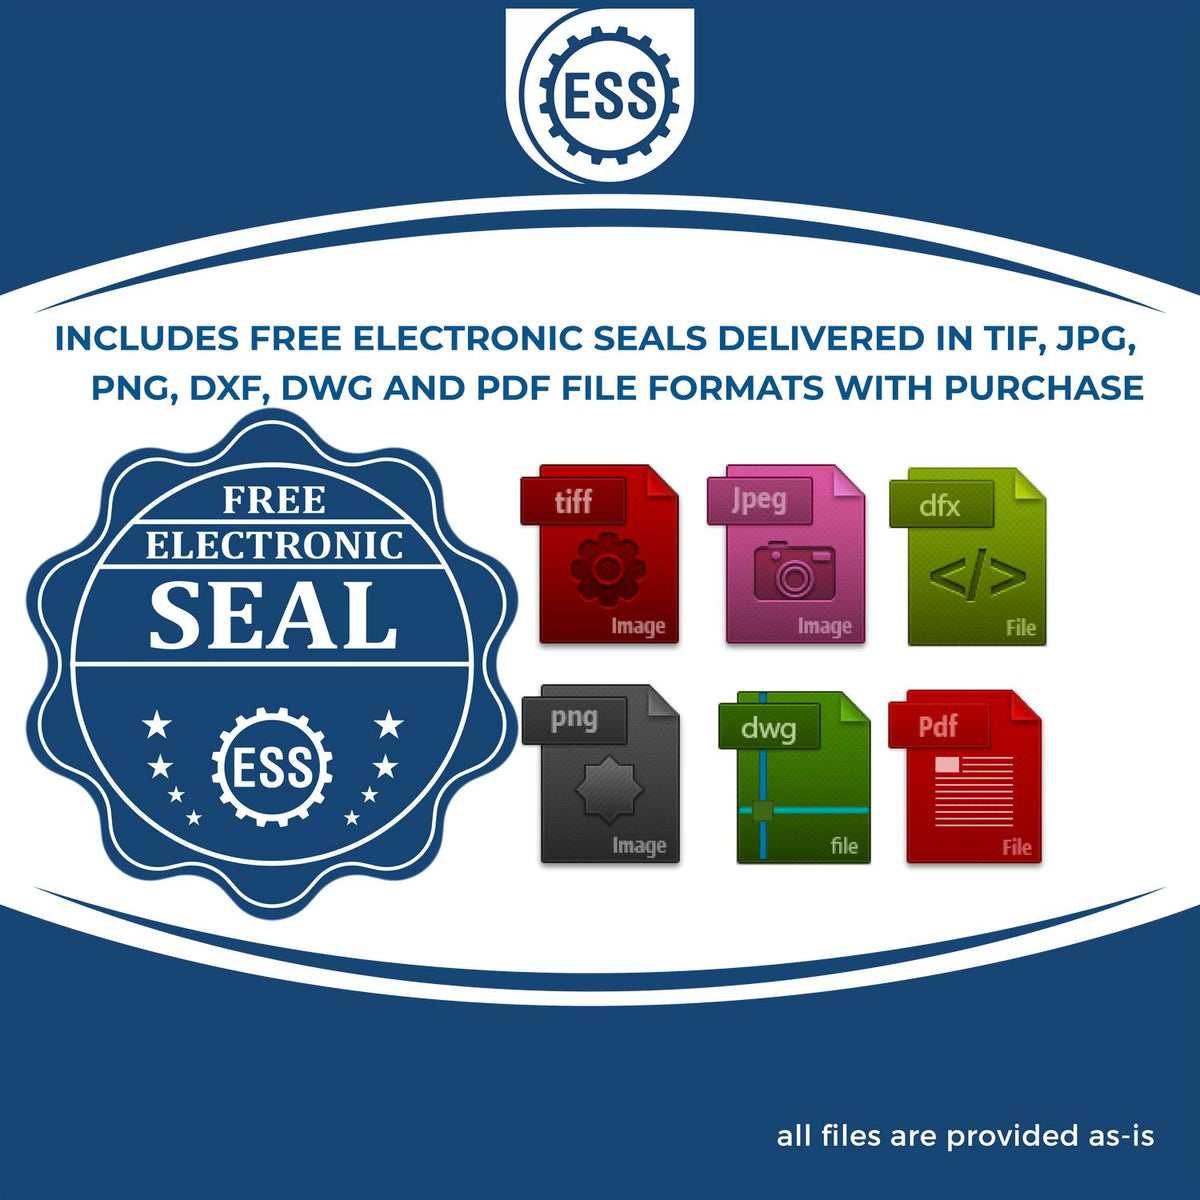 An infographic for the free electronic seal for the Premium MaxLight Pre-Inked Texas Landscape Architectural Stamp illustrating the different file type icons such as DXF, DWG, TIF, JPG and PNG.